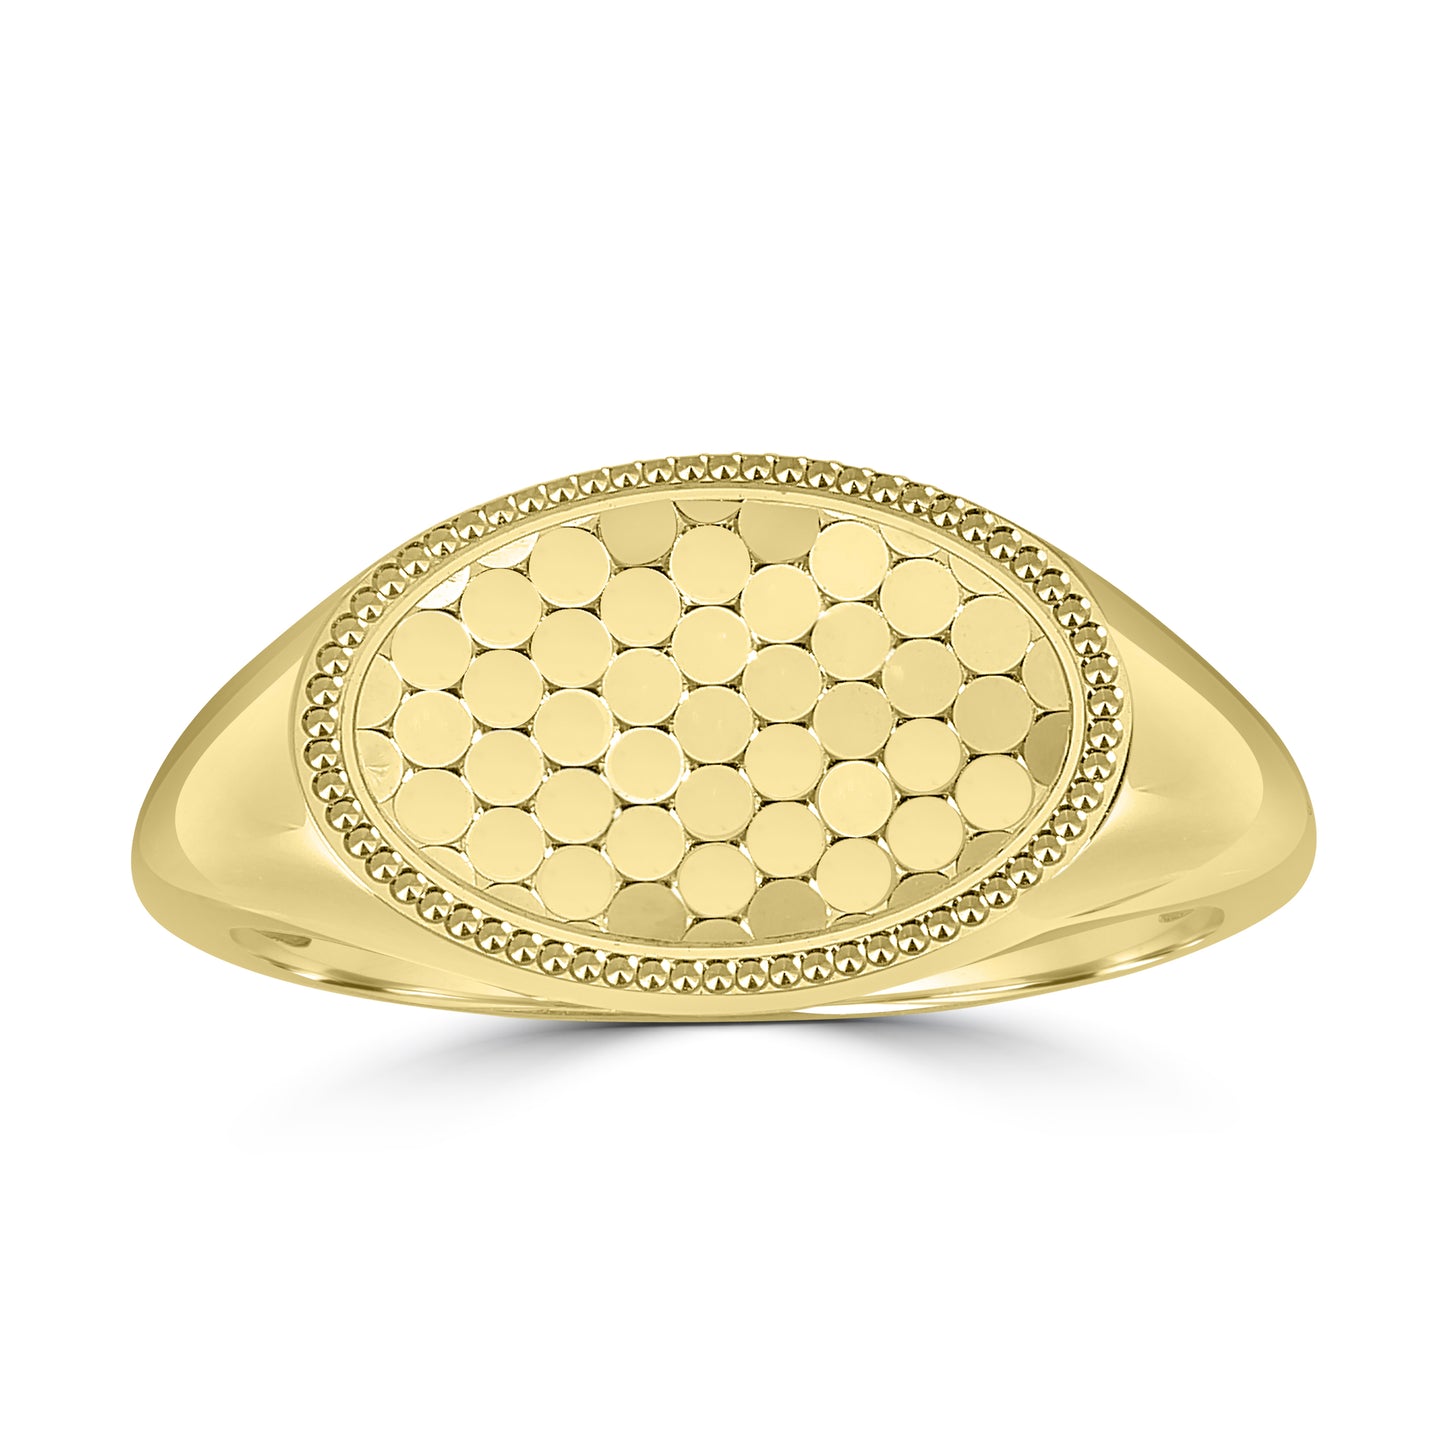 The Oval Shimmer Signet Ring